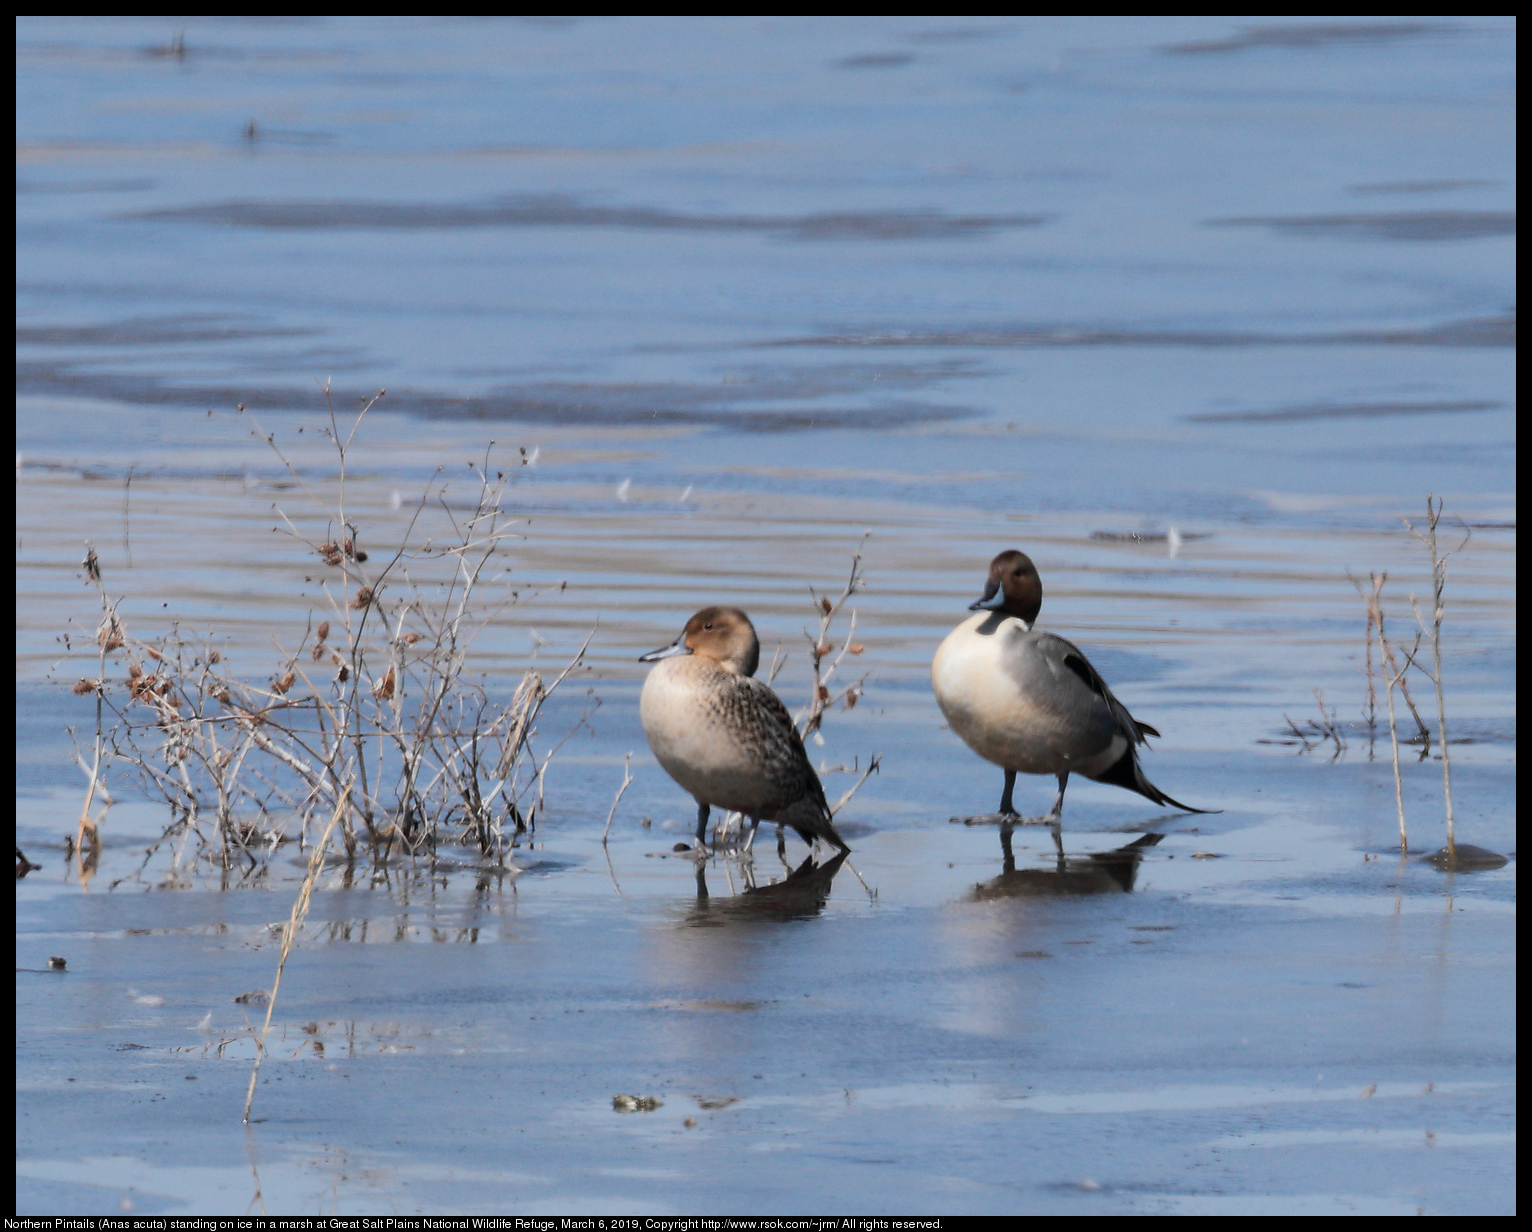 Northern Pintails (Anas acuta) standing on ice in a marsh at Great Salt Plains National Wildlife Refuge, March 6, 2019